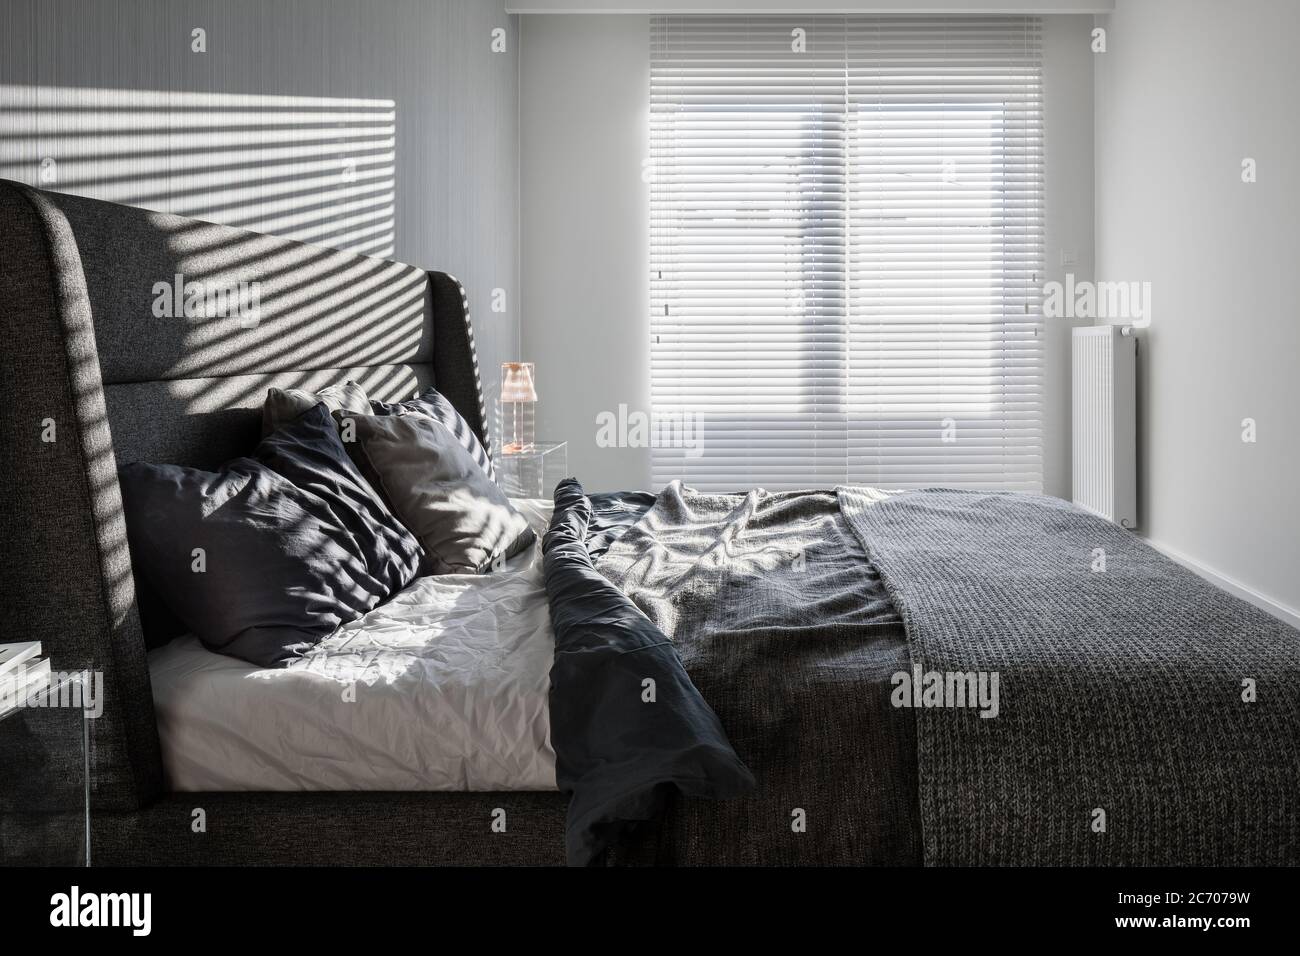 Sunny, gray bedroom with double bed and window blinds Stock Photo